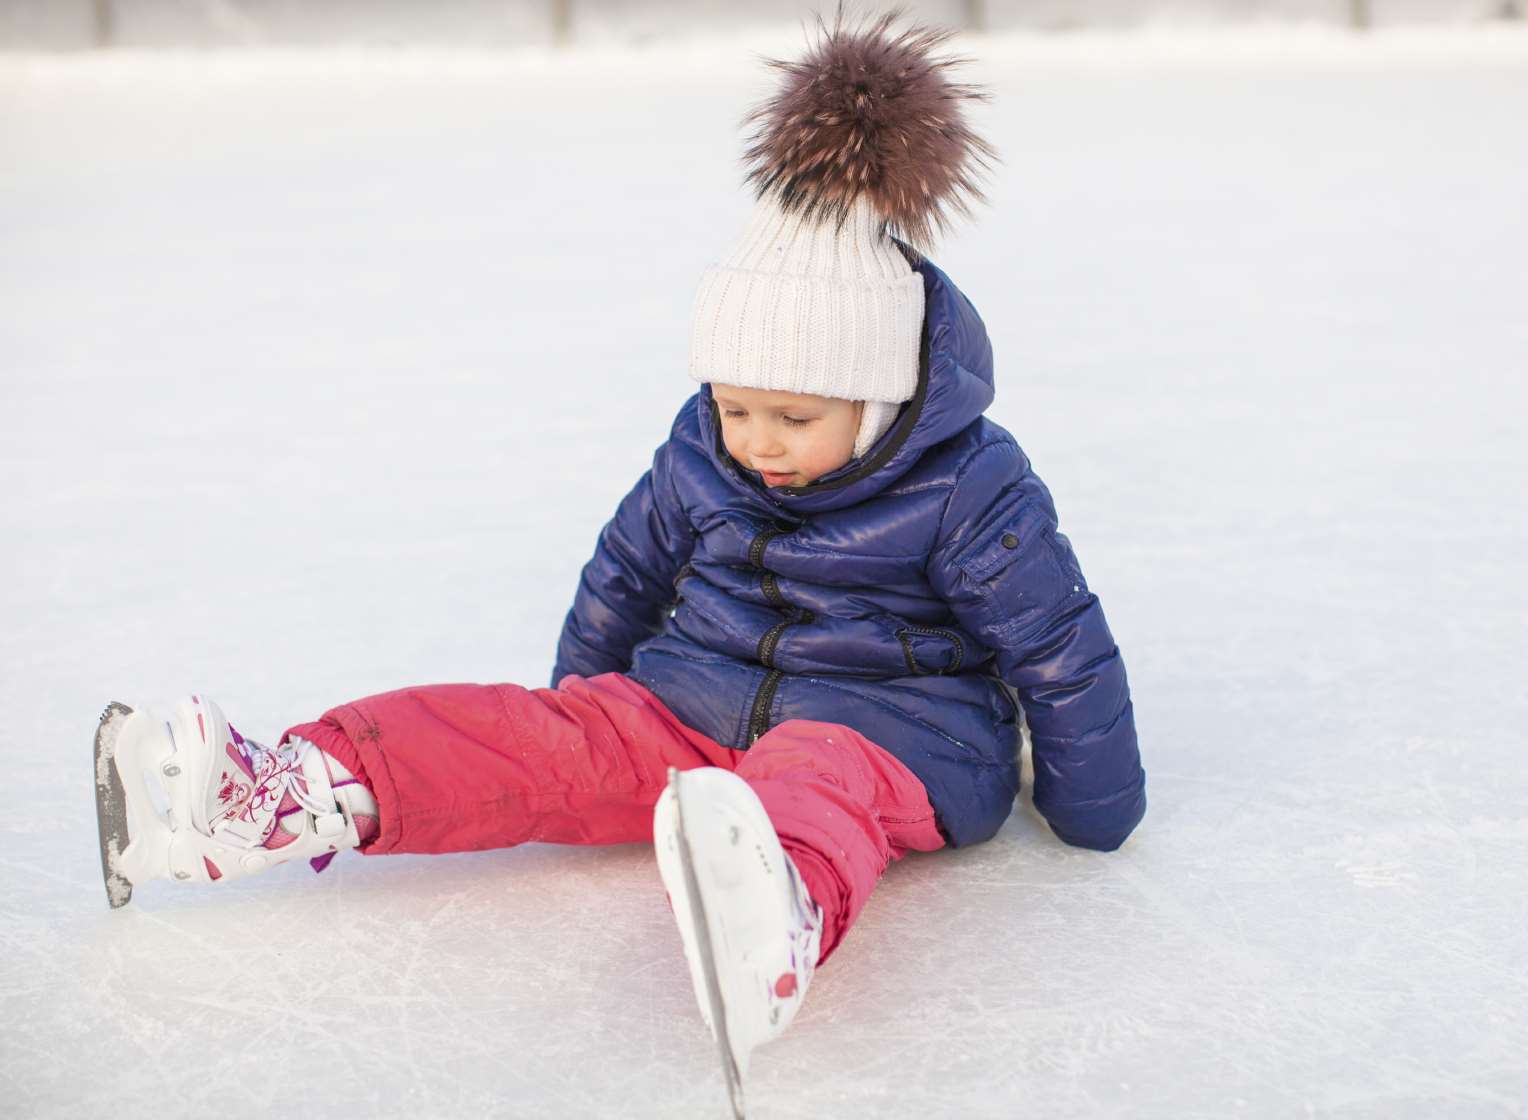 Ice skating will be on offer in Tunbridge Wells